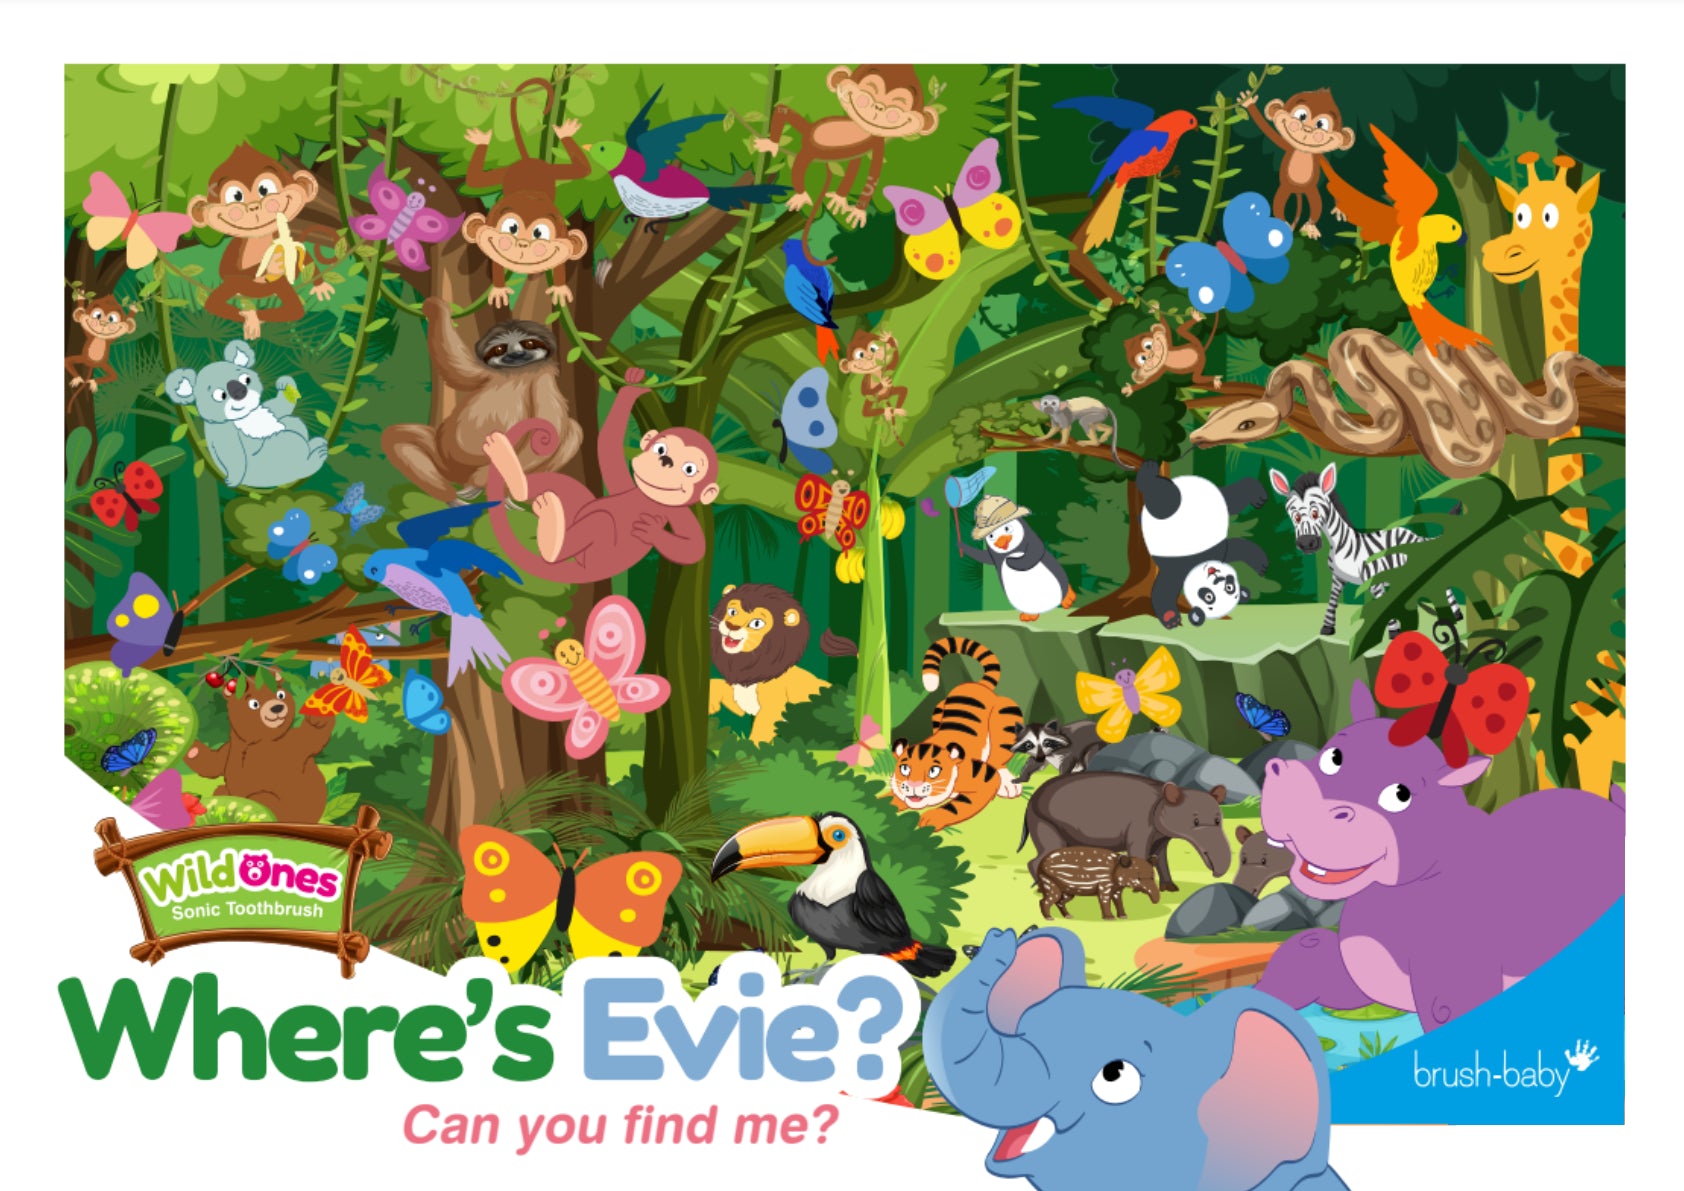 Where's Evie the WildOnes Elephant Kids Electric Rechargeable Toothbrush activity sheet